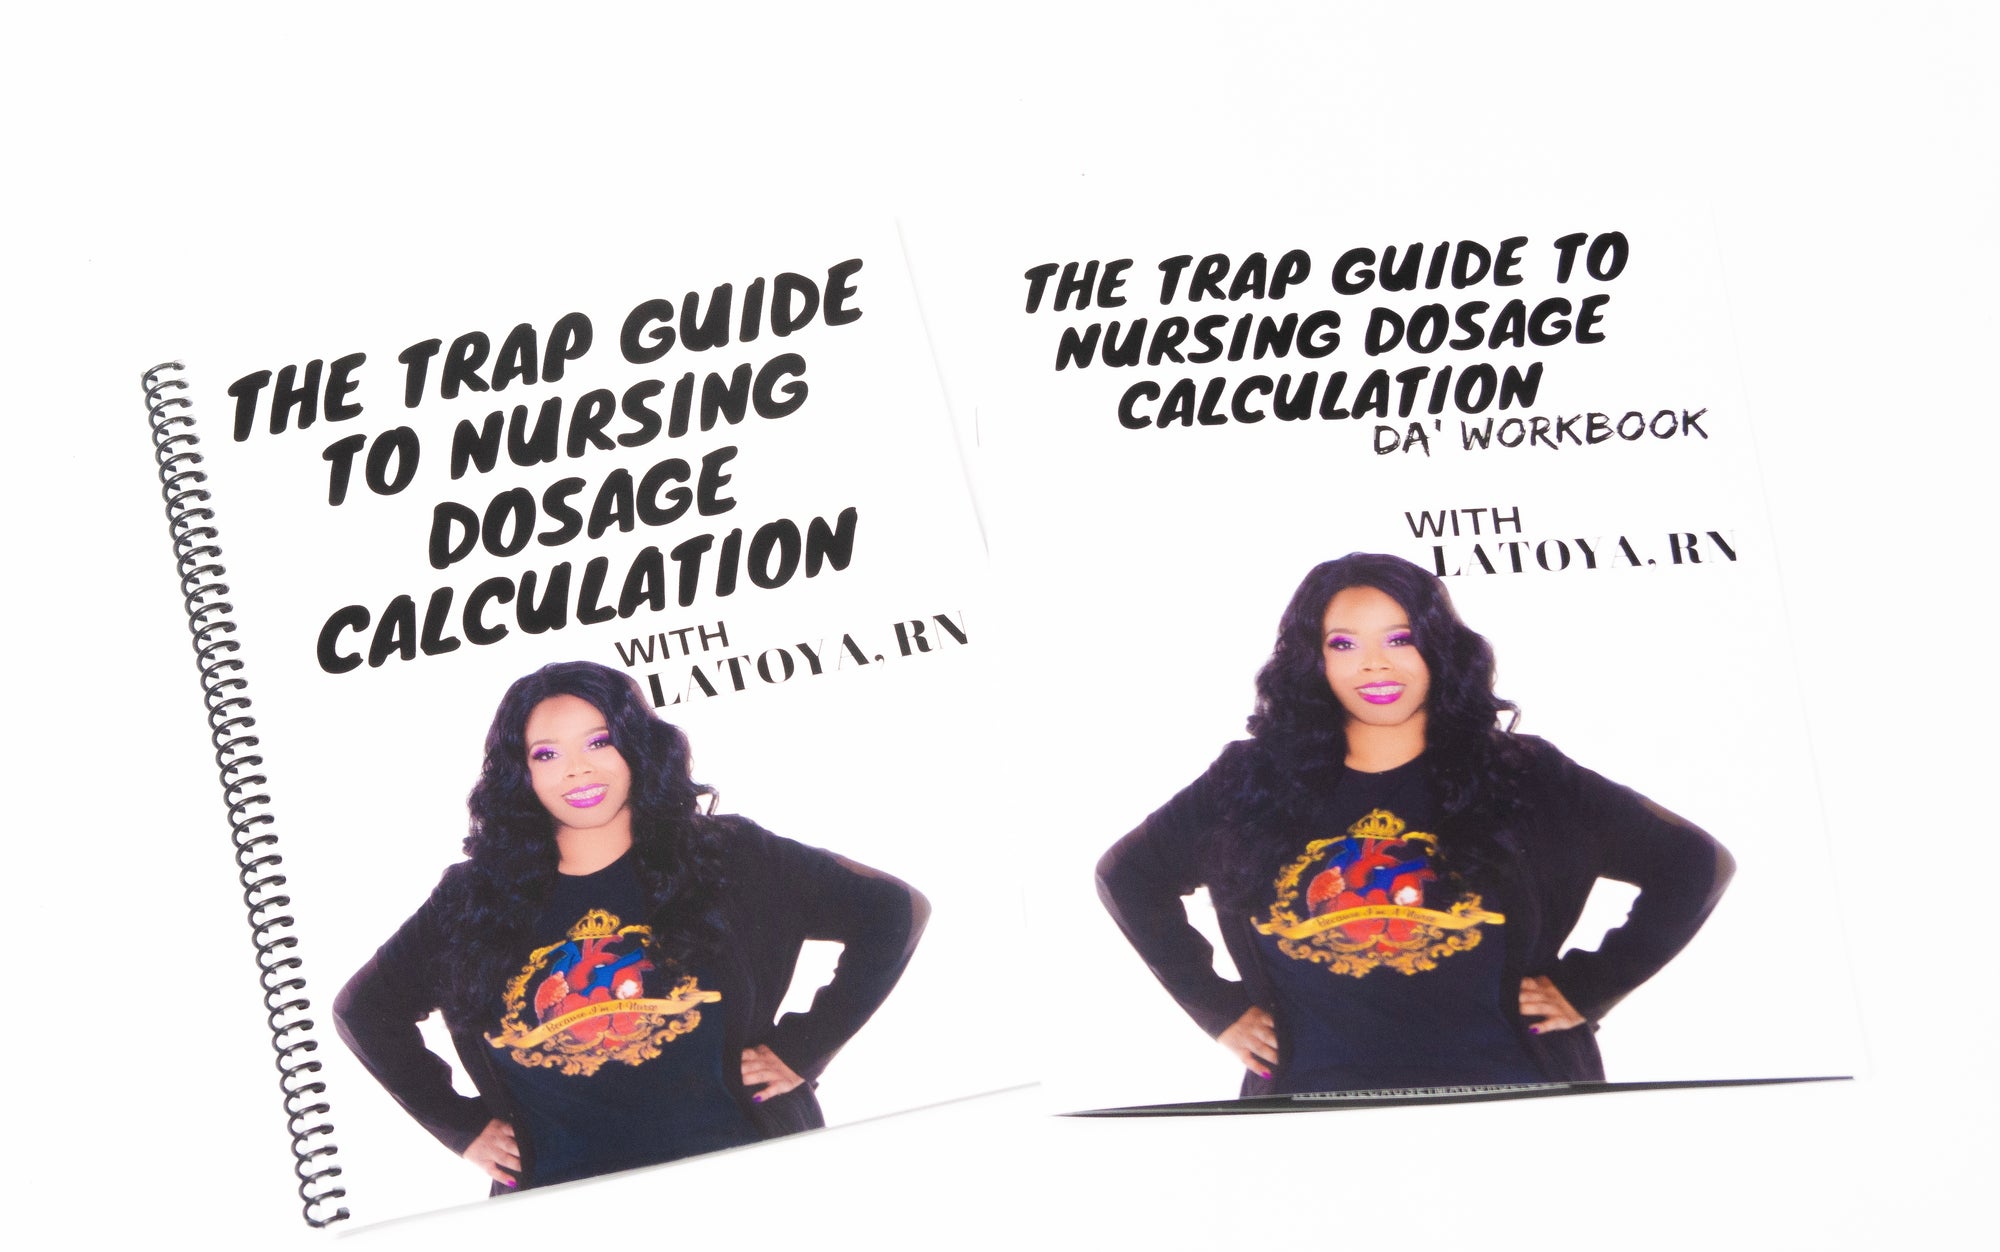 Trap Guide To Nursing Dosage Calculation with LaToya, RN 𝗕𝗢𝗢𝗞 𝗮𝗻𝗱 𝗪𝗢𝗥𝗞𝗕𝗢𝗢𝗞 𝗕𝗨𝗡𝗗𝗟𝗘 𝗗𝗘𝗔𝗟